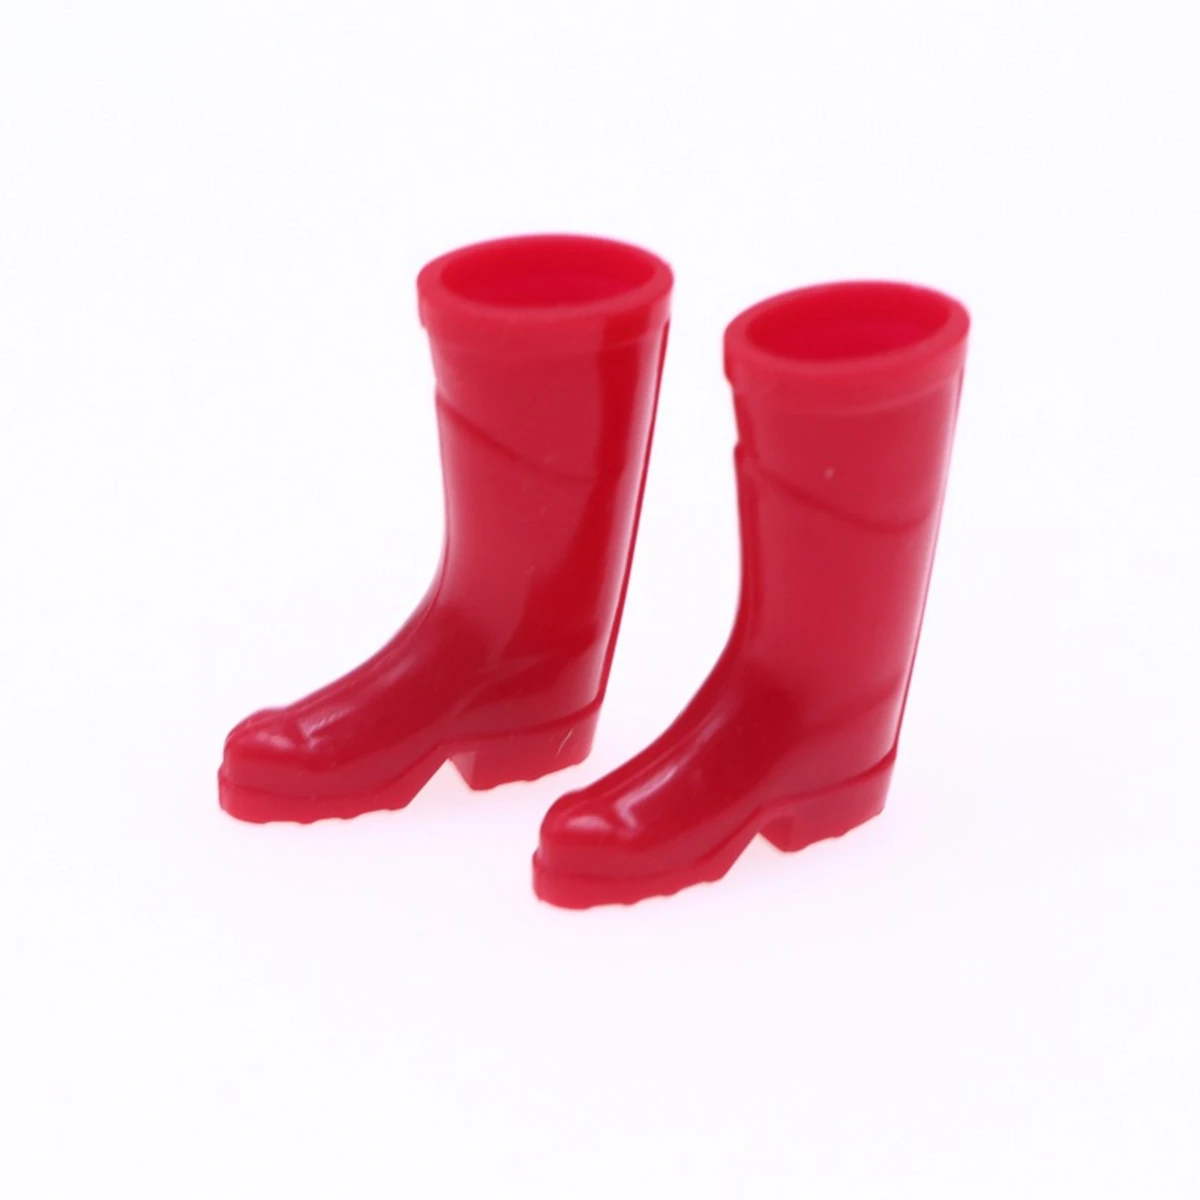 Children's Toys Doll House Mini Cute Rain Boots Simulation Rain Boots Gardening Straight Silicone Shoes